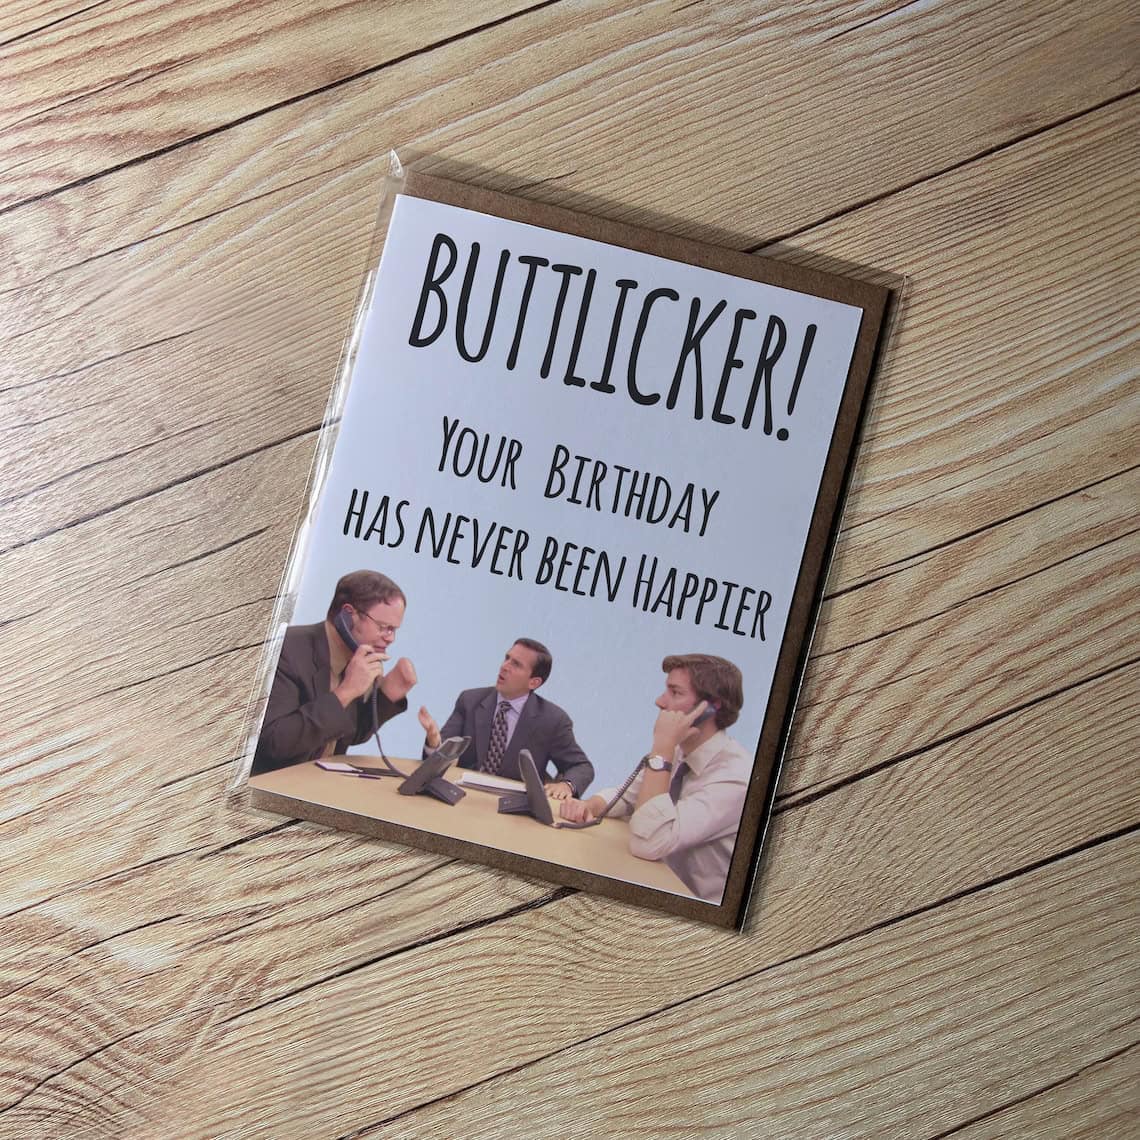 Buttlicker from The Office Card